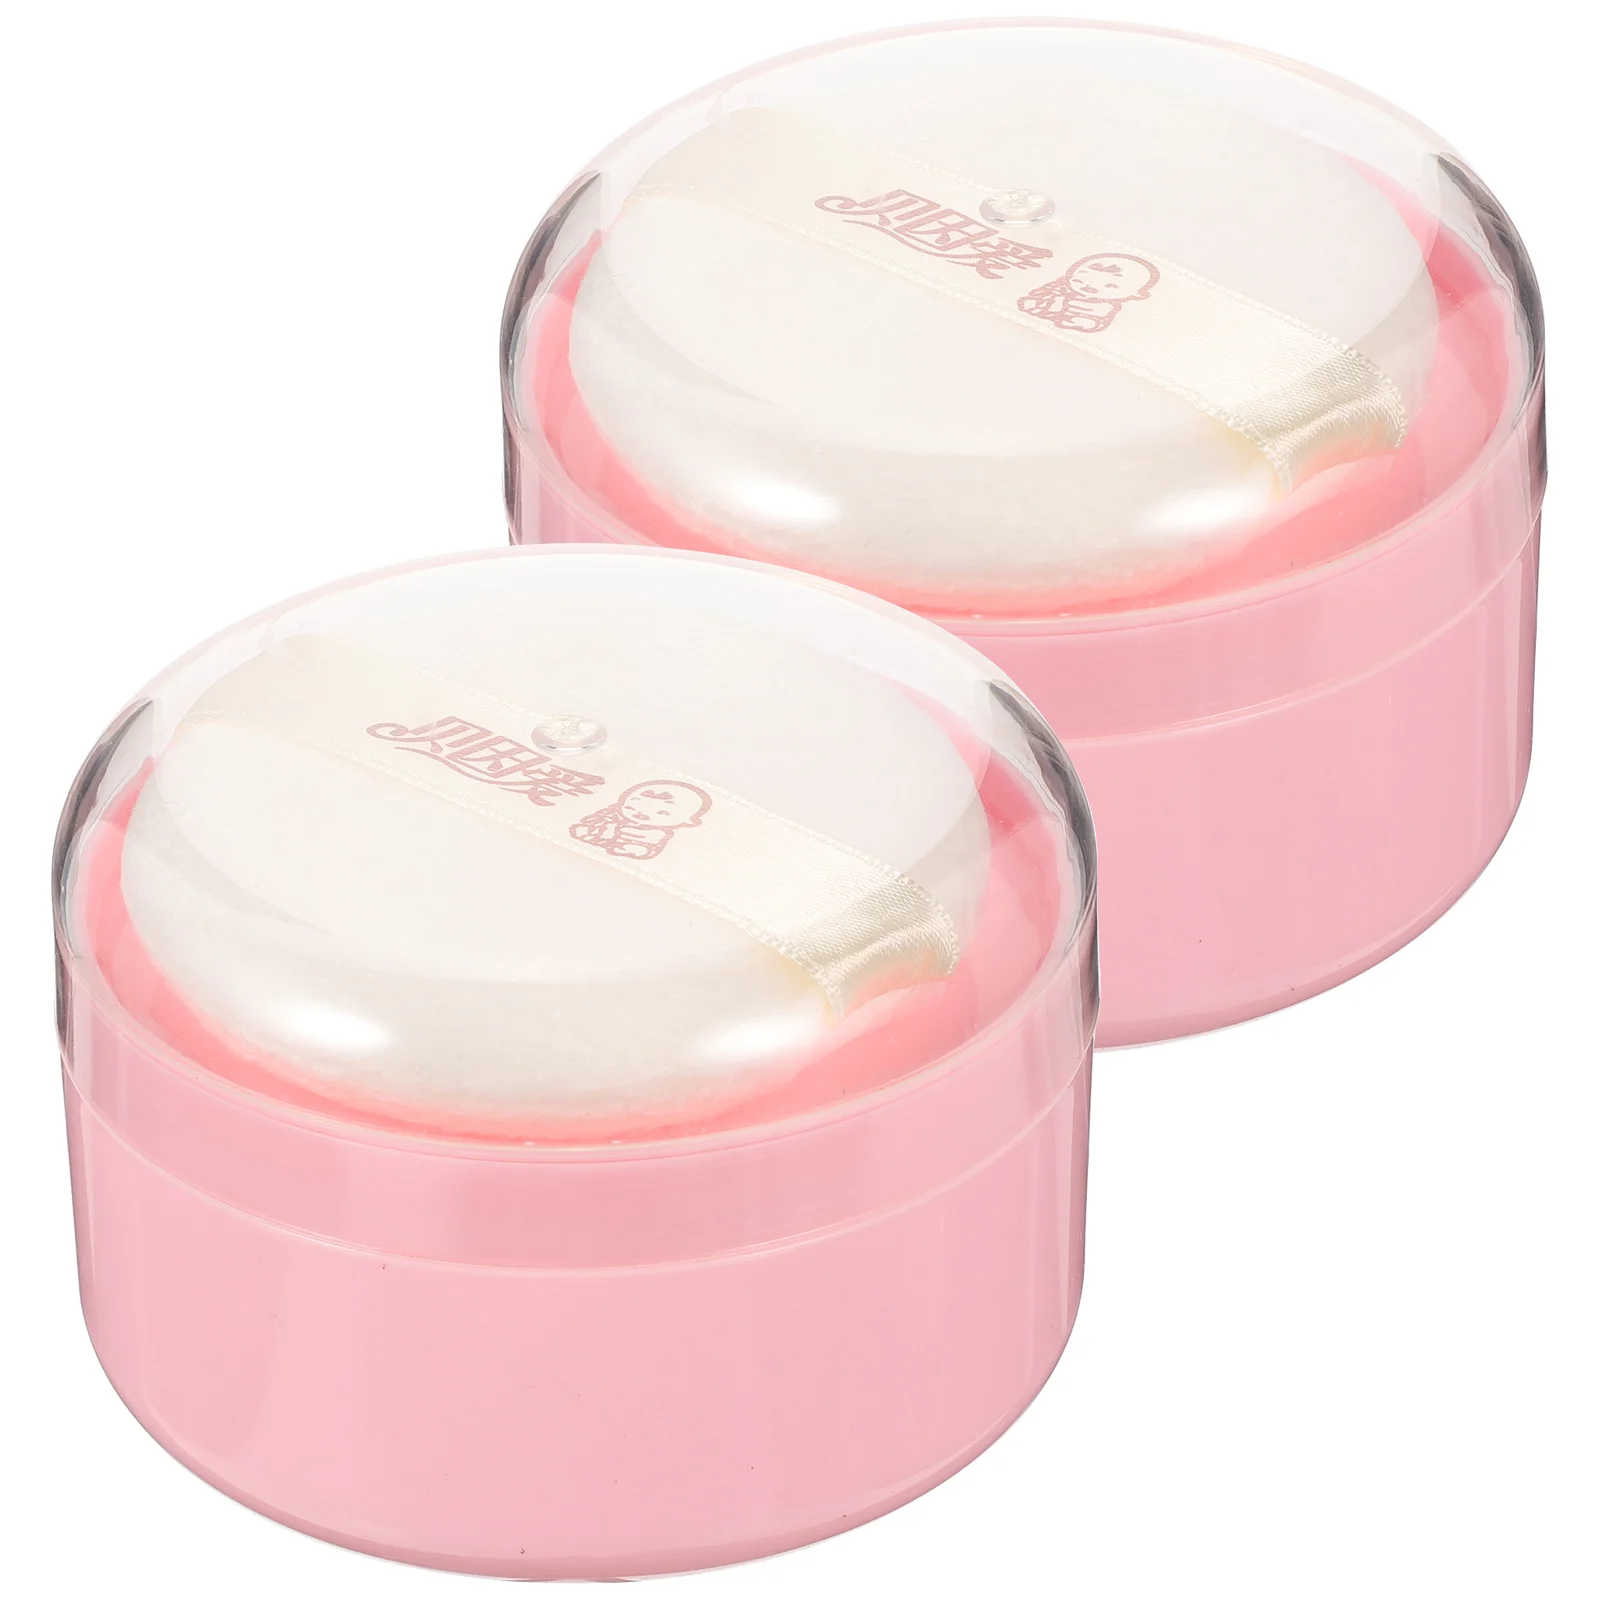 

2pcs Body Powder Puffs Boxes Loose Powder Containers Dusting Powder Boxes with Puffs